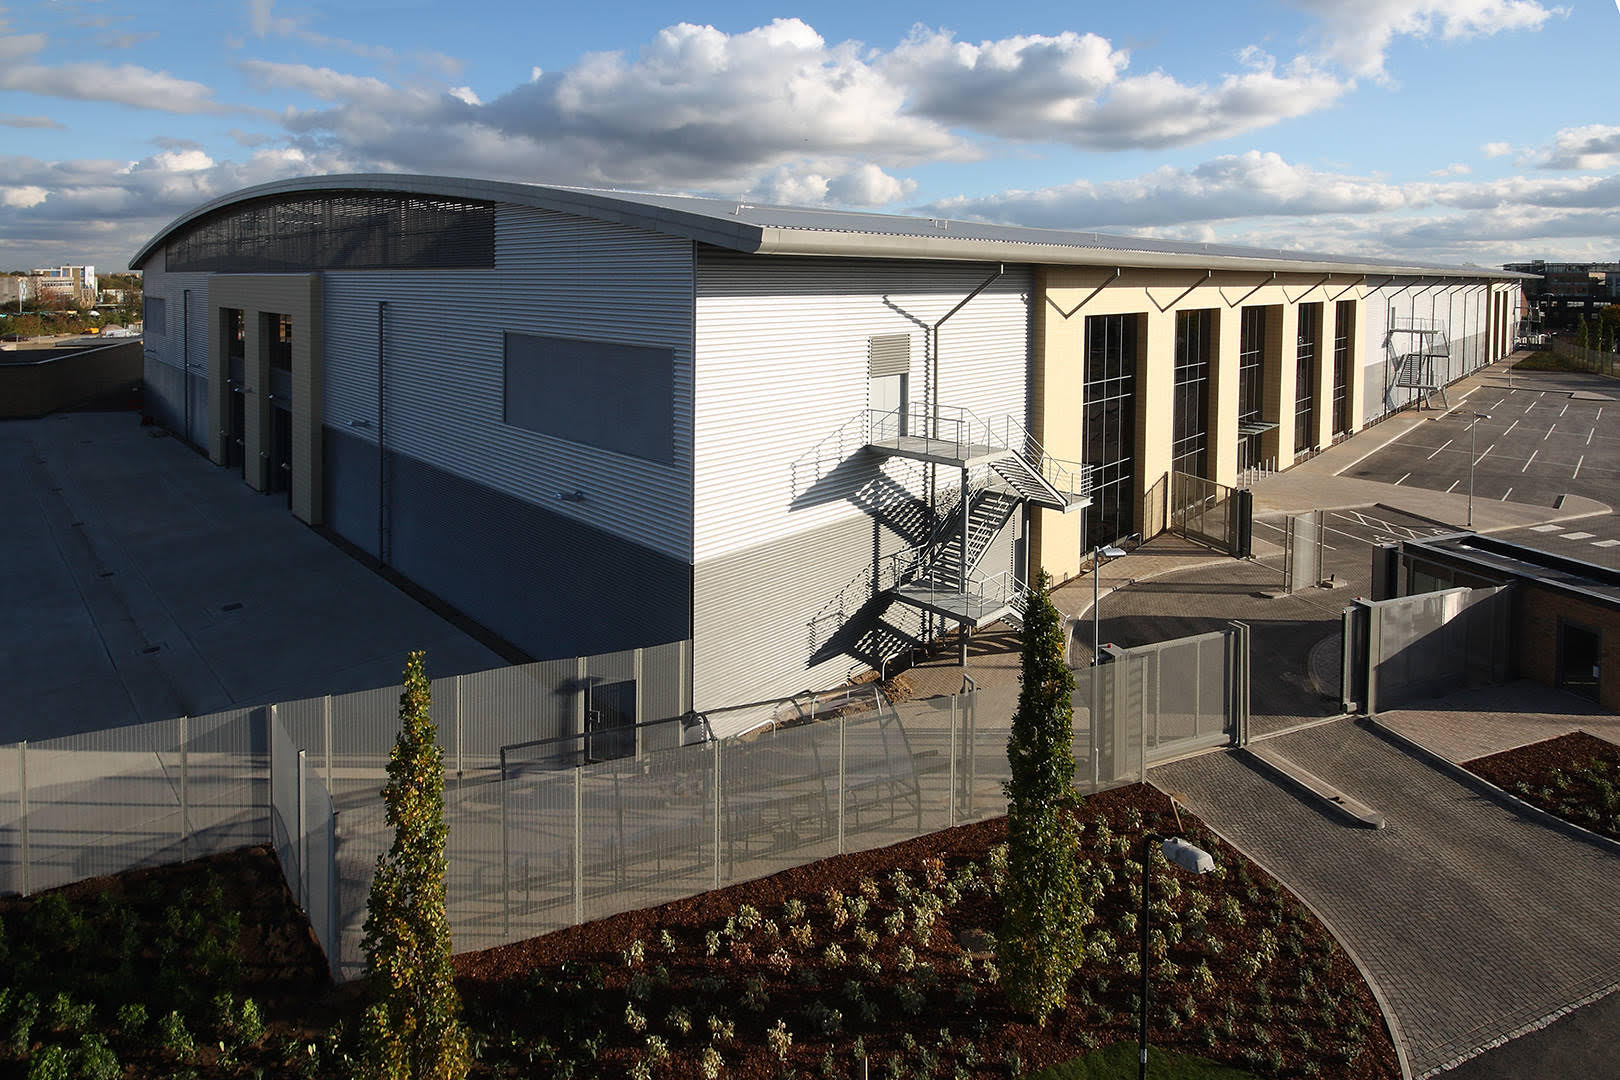 Kao Data appoints NWA Architects for the expansion of its KLON-06 data centre in Slough